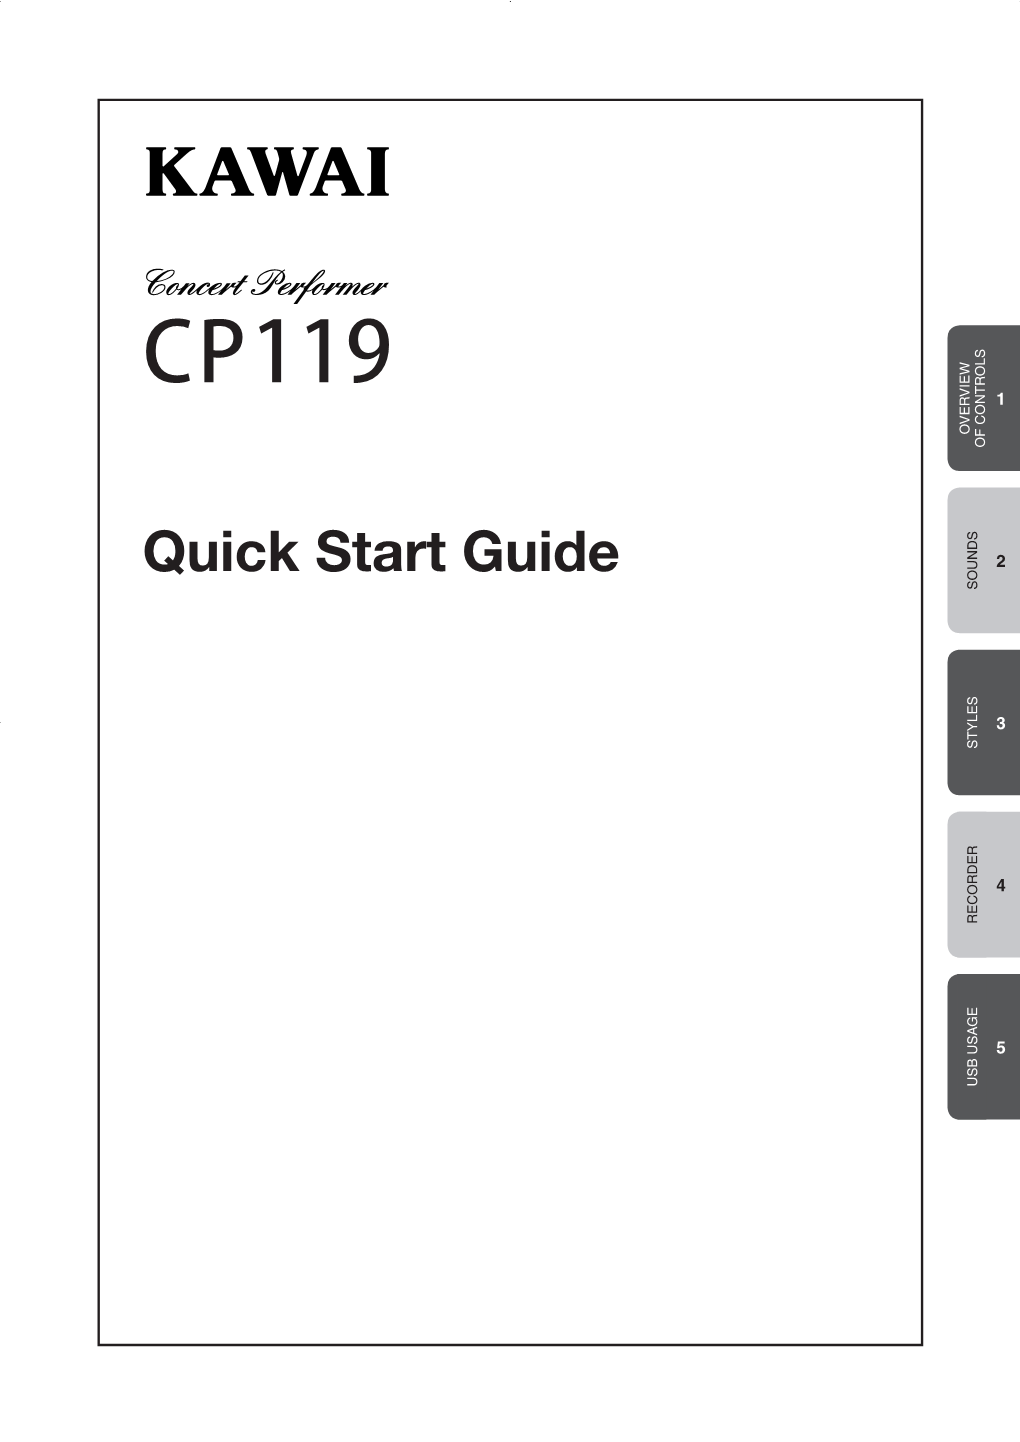 CP119 Quick Start Guide